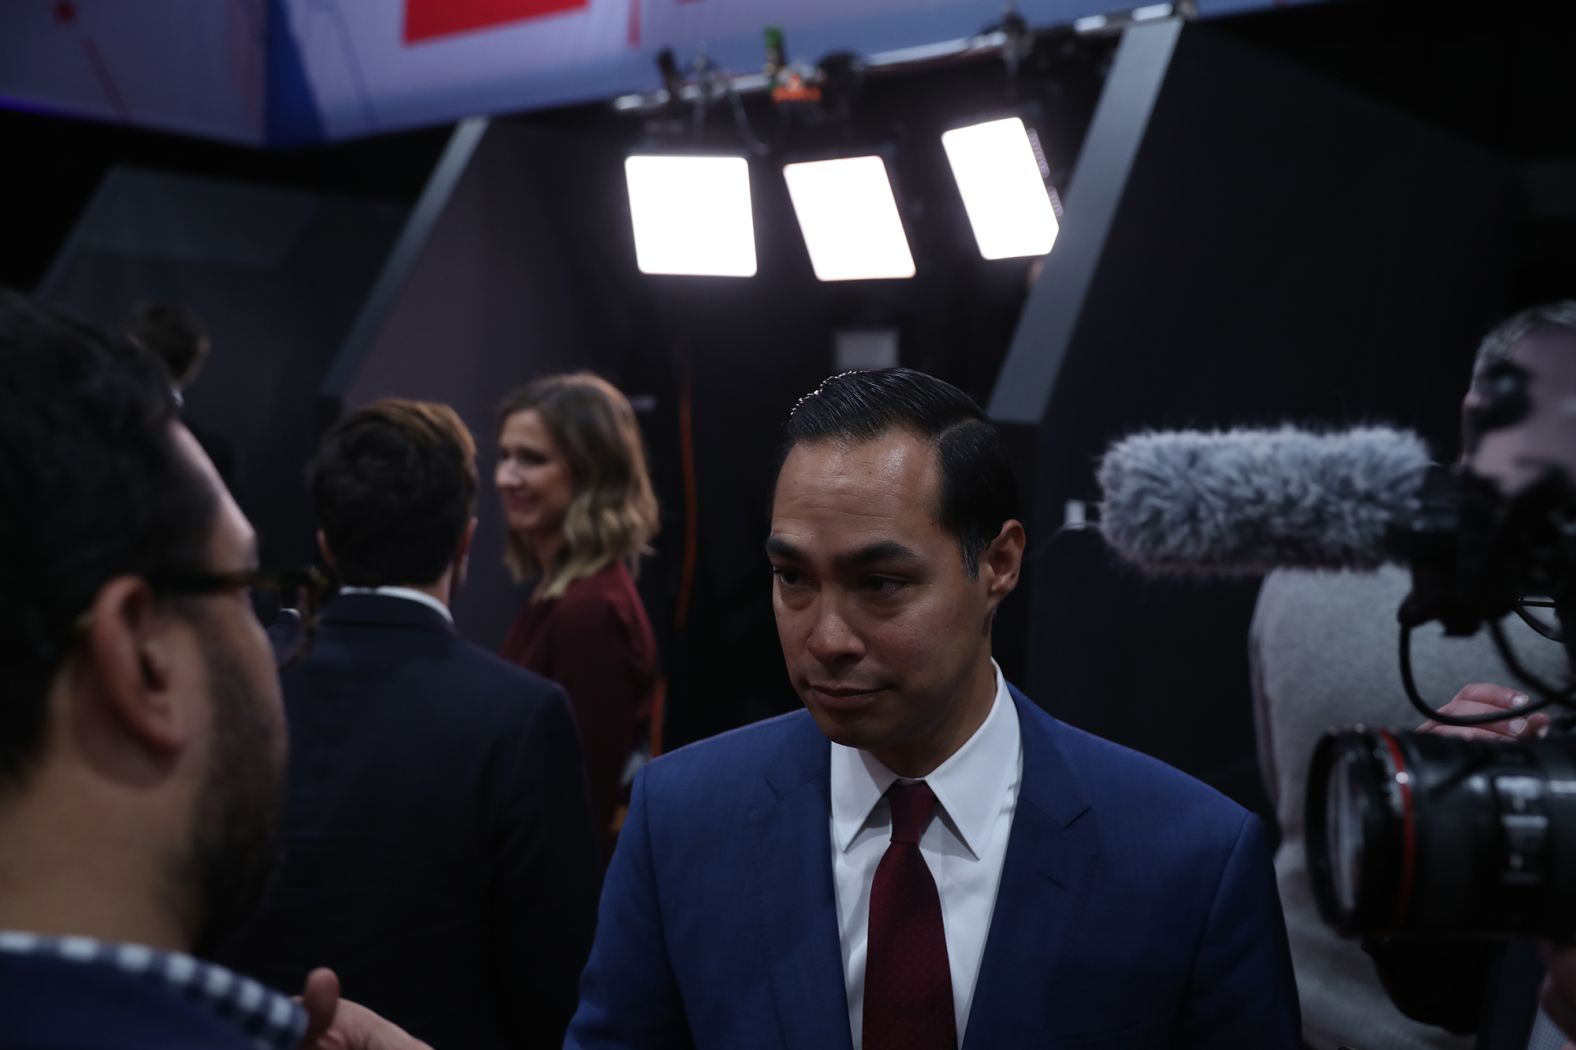 Former presidential candidate Julian Castro speaks to media members in the spin room.